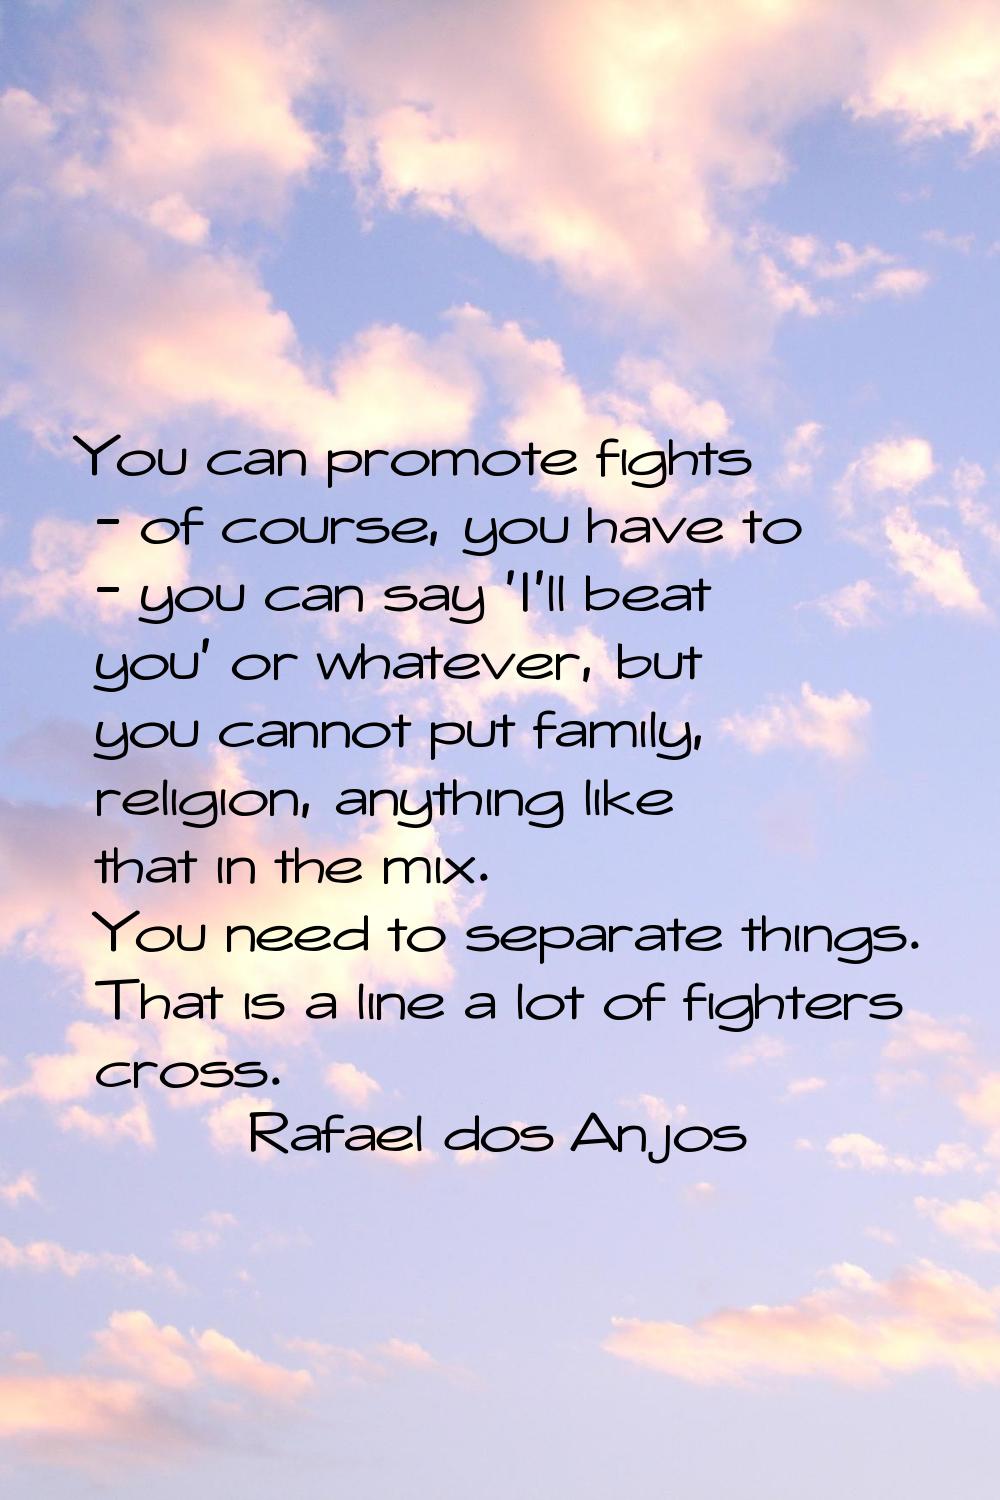 You can promote fights - of course, you have to - you can say 'I'll beat you' or whatever, but you 